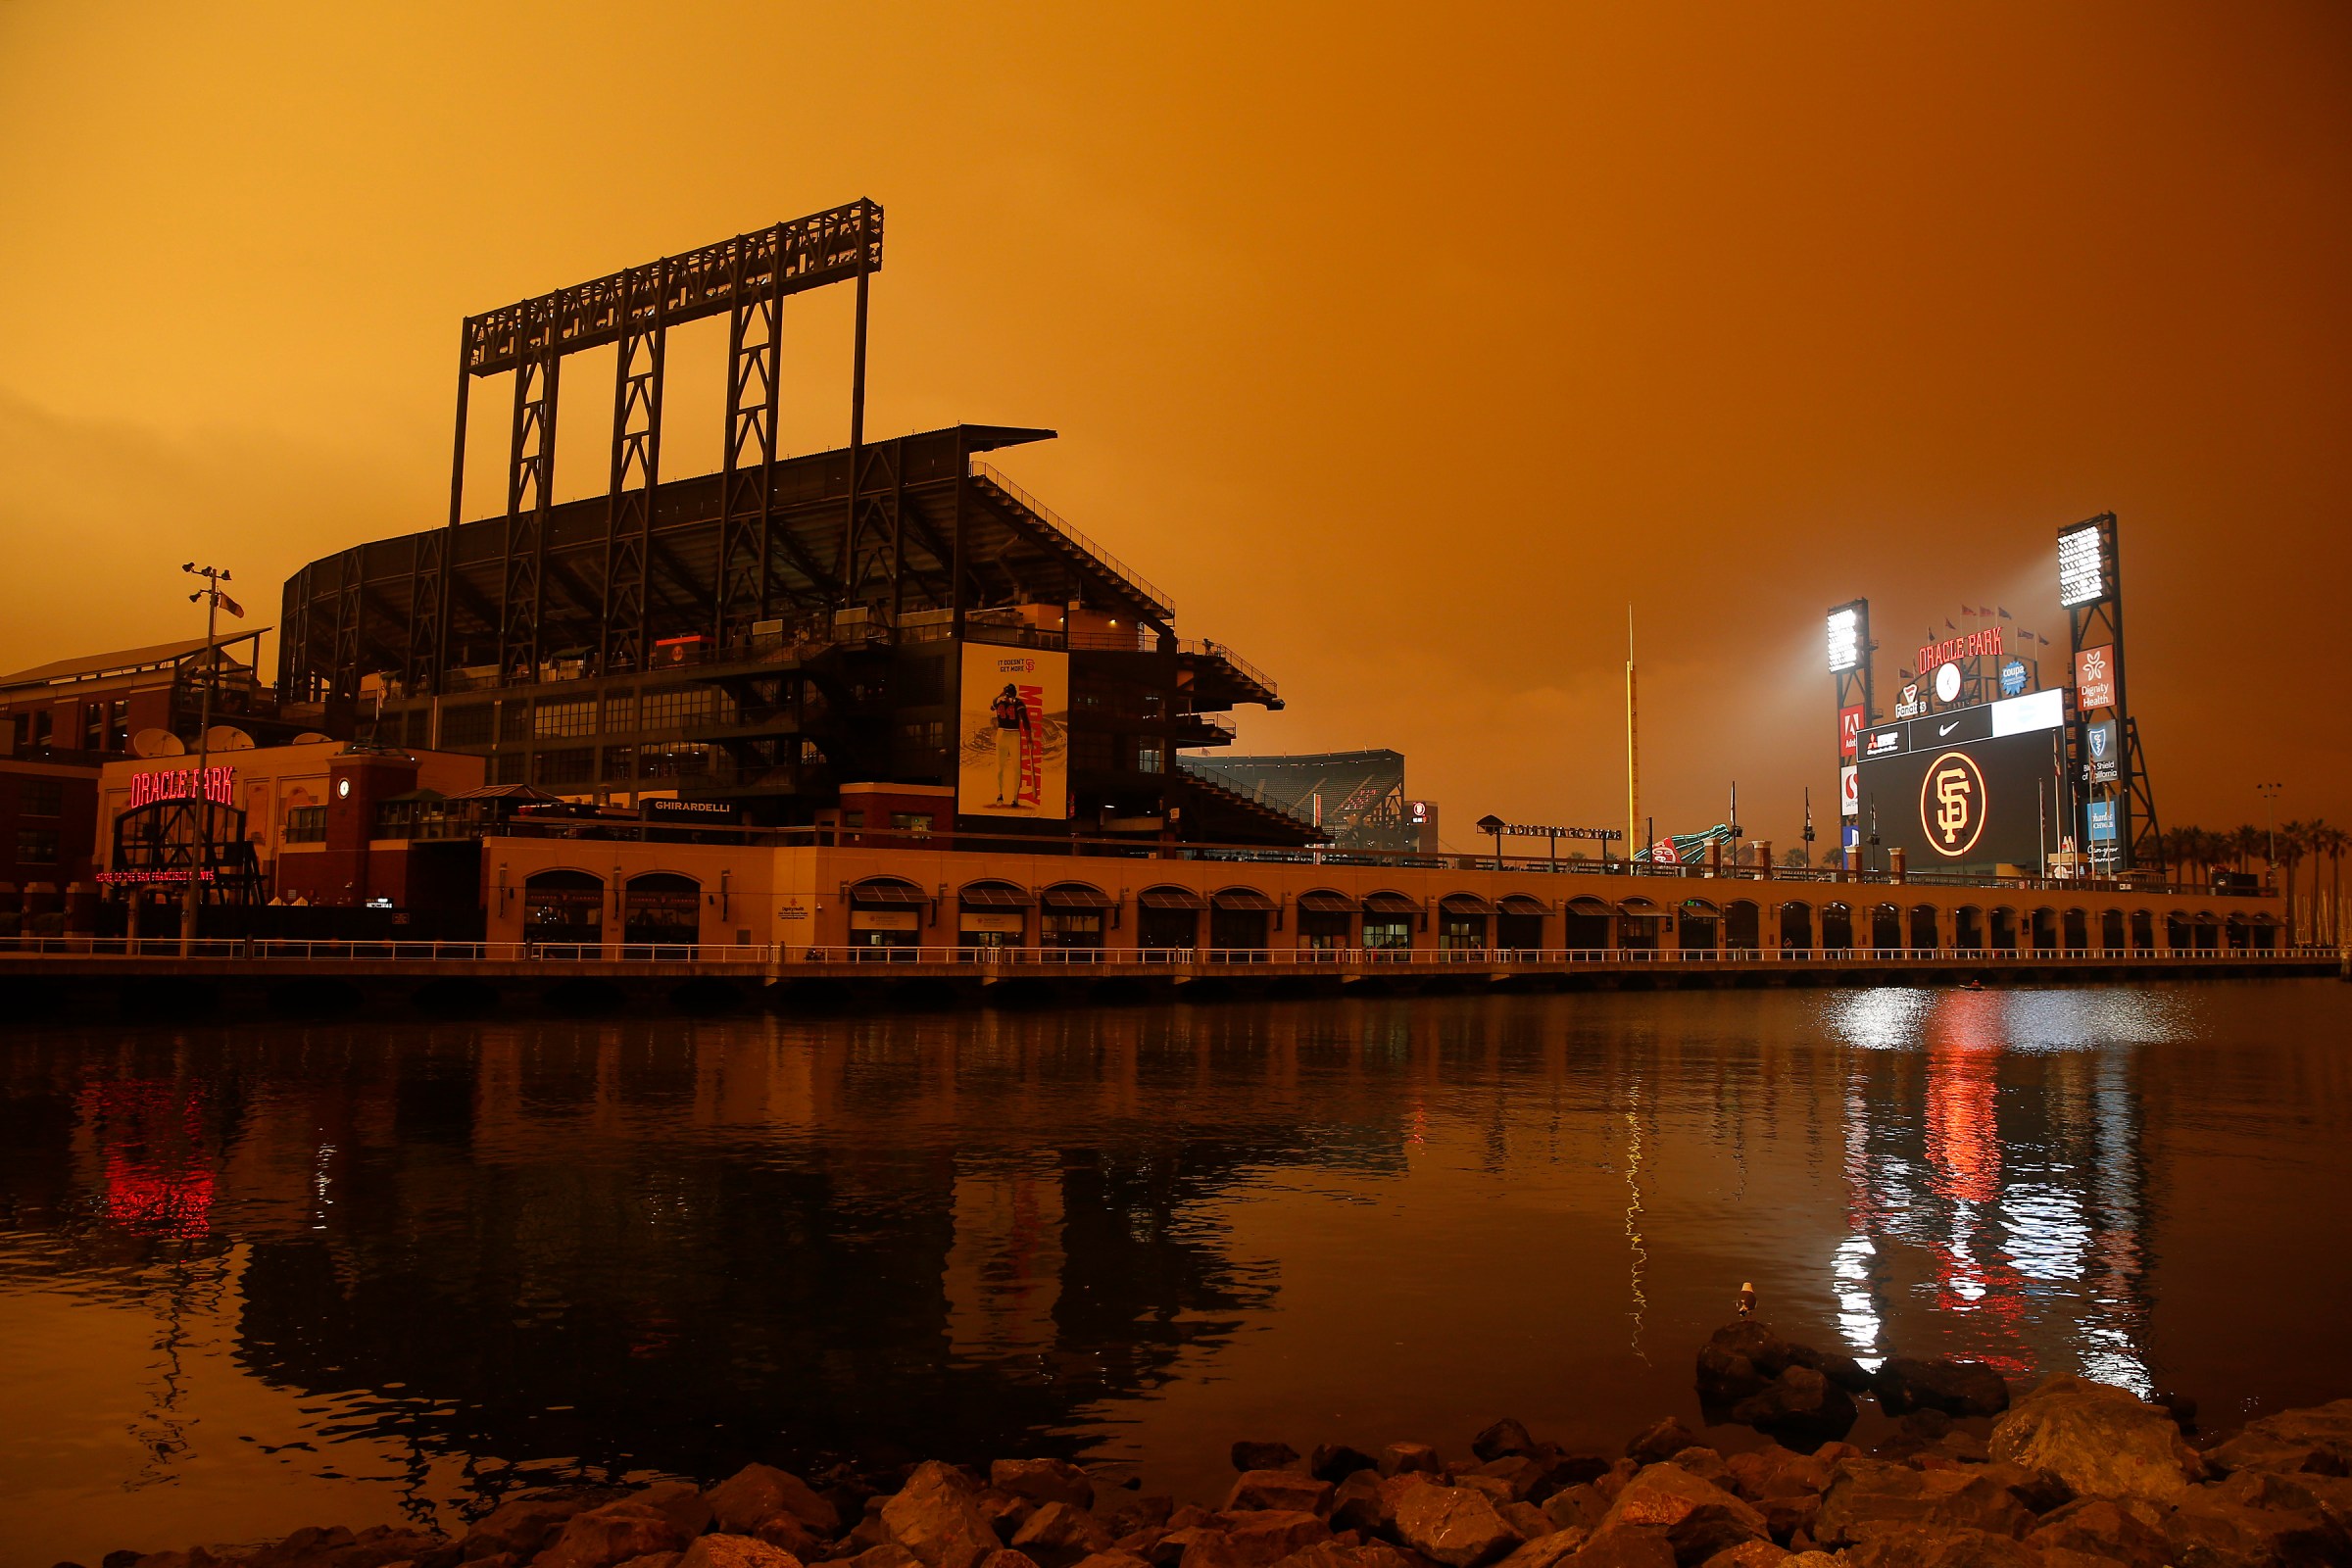 SAN FRANCISCO, CALIFORNIA - SEPTEMBER 09: An exterior view of the ballpark before the game between the San Francisco Giants and the Seattle Mariners at Oracle Park on September 09, 2020 in San Francisco, California. Smoke from various wildfires burning across Northern California has blanketed the city in an orange glow. (Photo by Lachlan Cunningham/Getty Images)